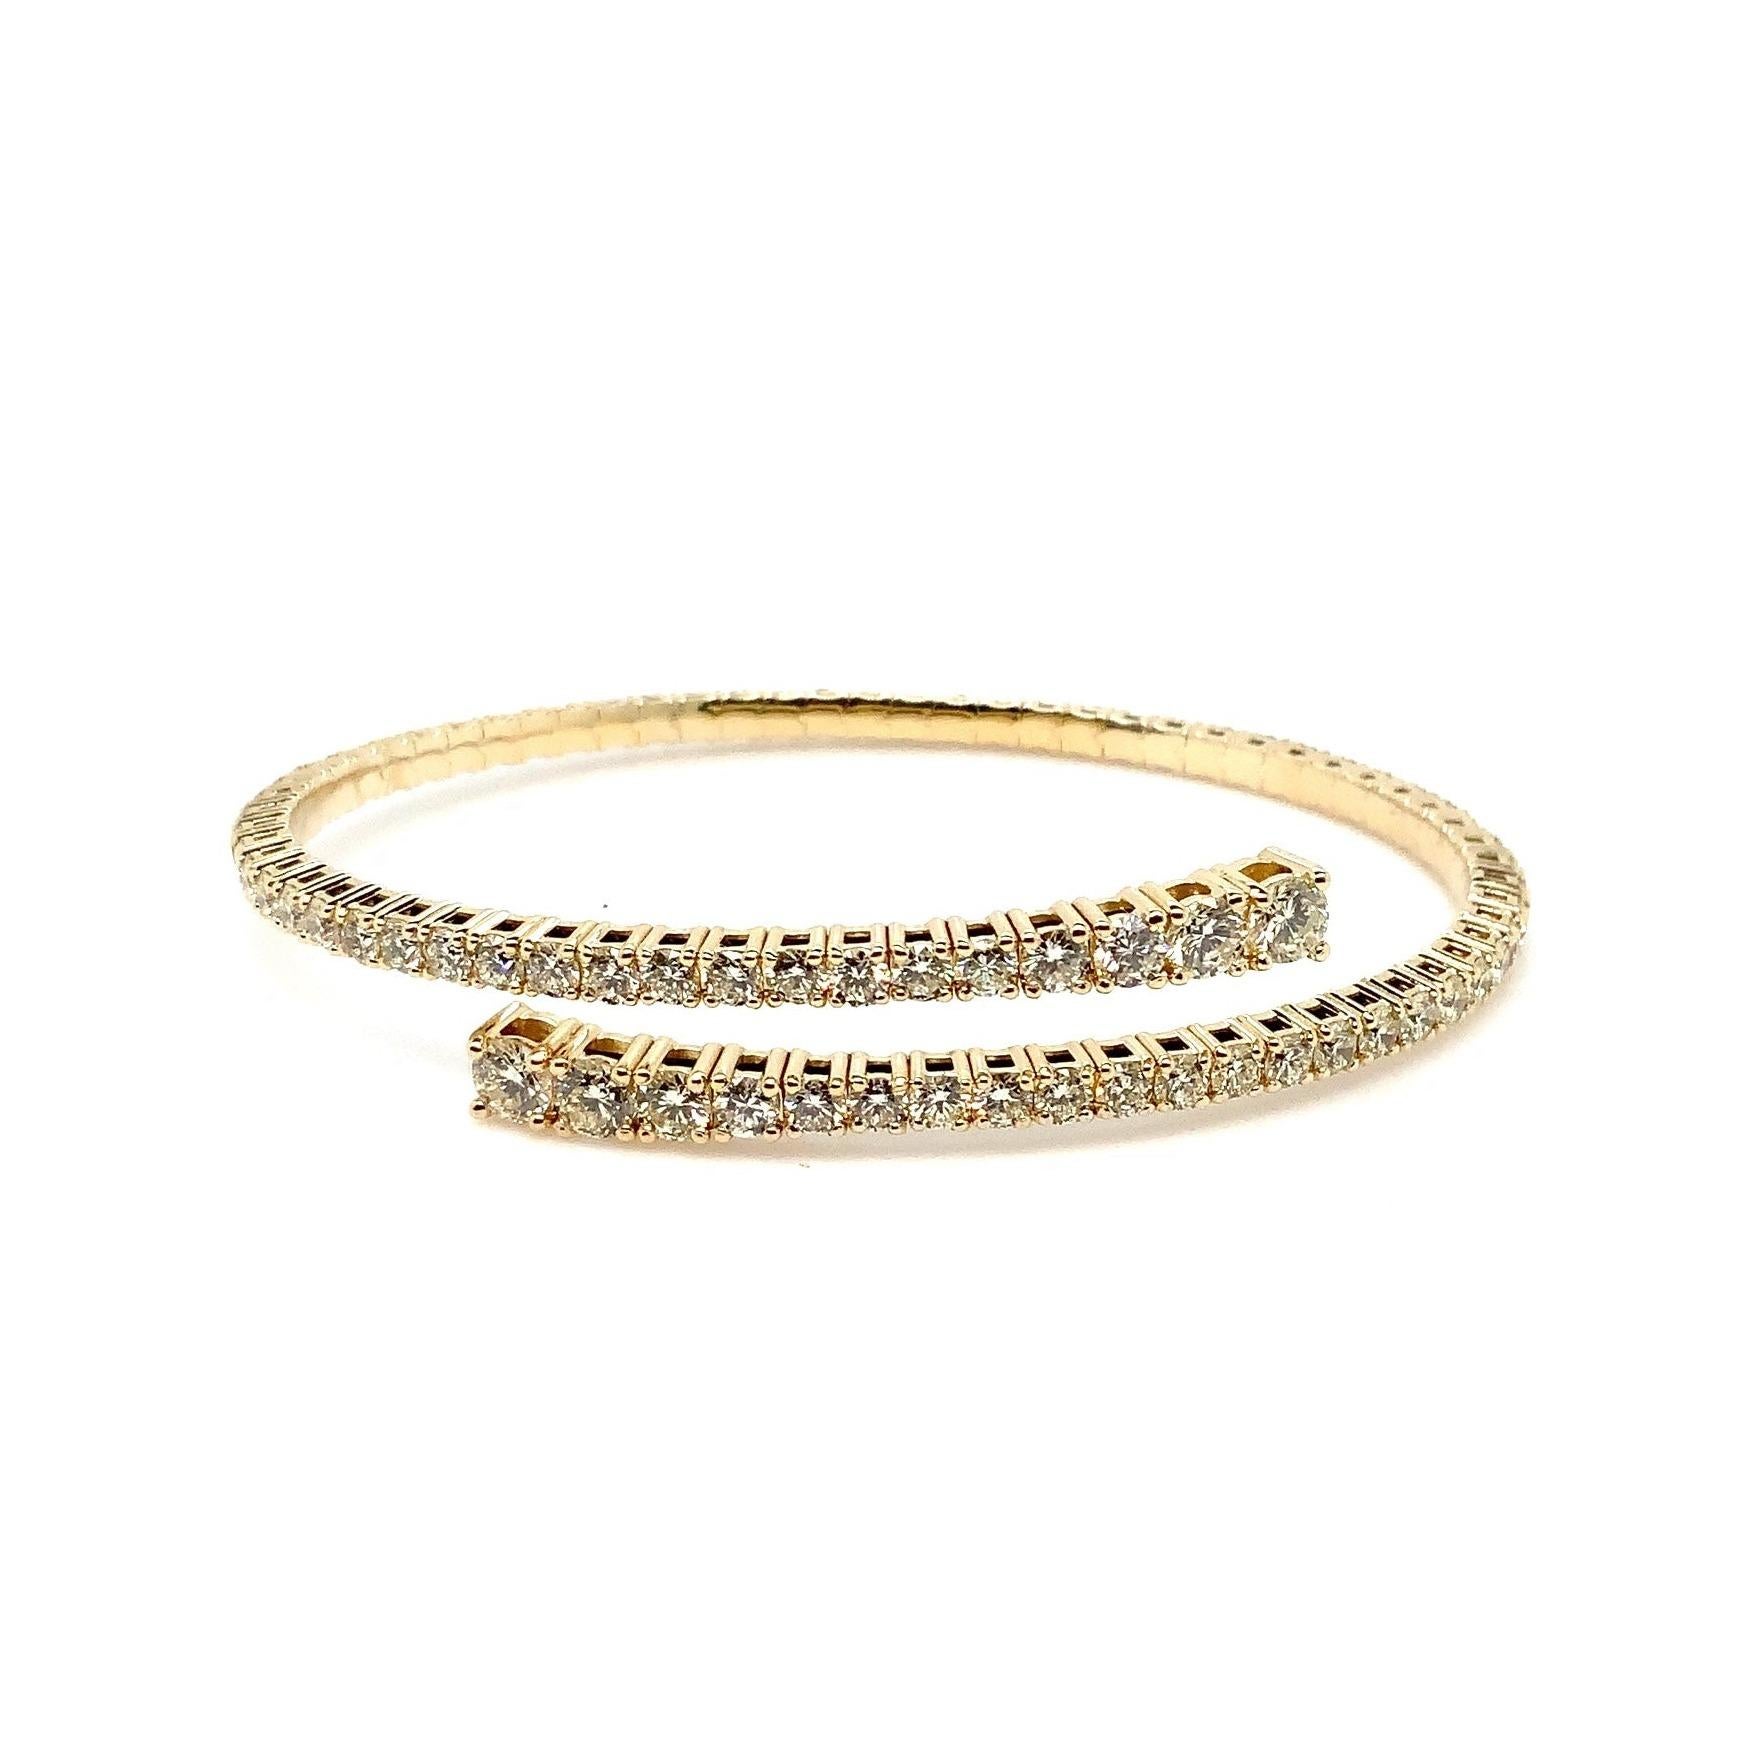 Experience the exquisite beauty of the Flexi Open By Pass Design Diamond Bangle Set, crafted in 14K Yellow Gold and featuring 79 Round Brilliant Cut Diamonds totaling 6.50 cts. tw. in graduating sizes. Each diamond boasts an impressive F-G color and